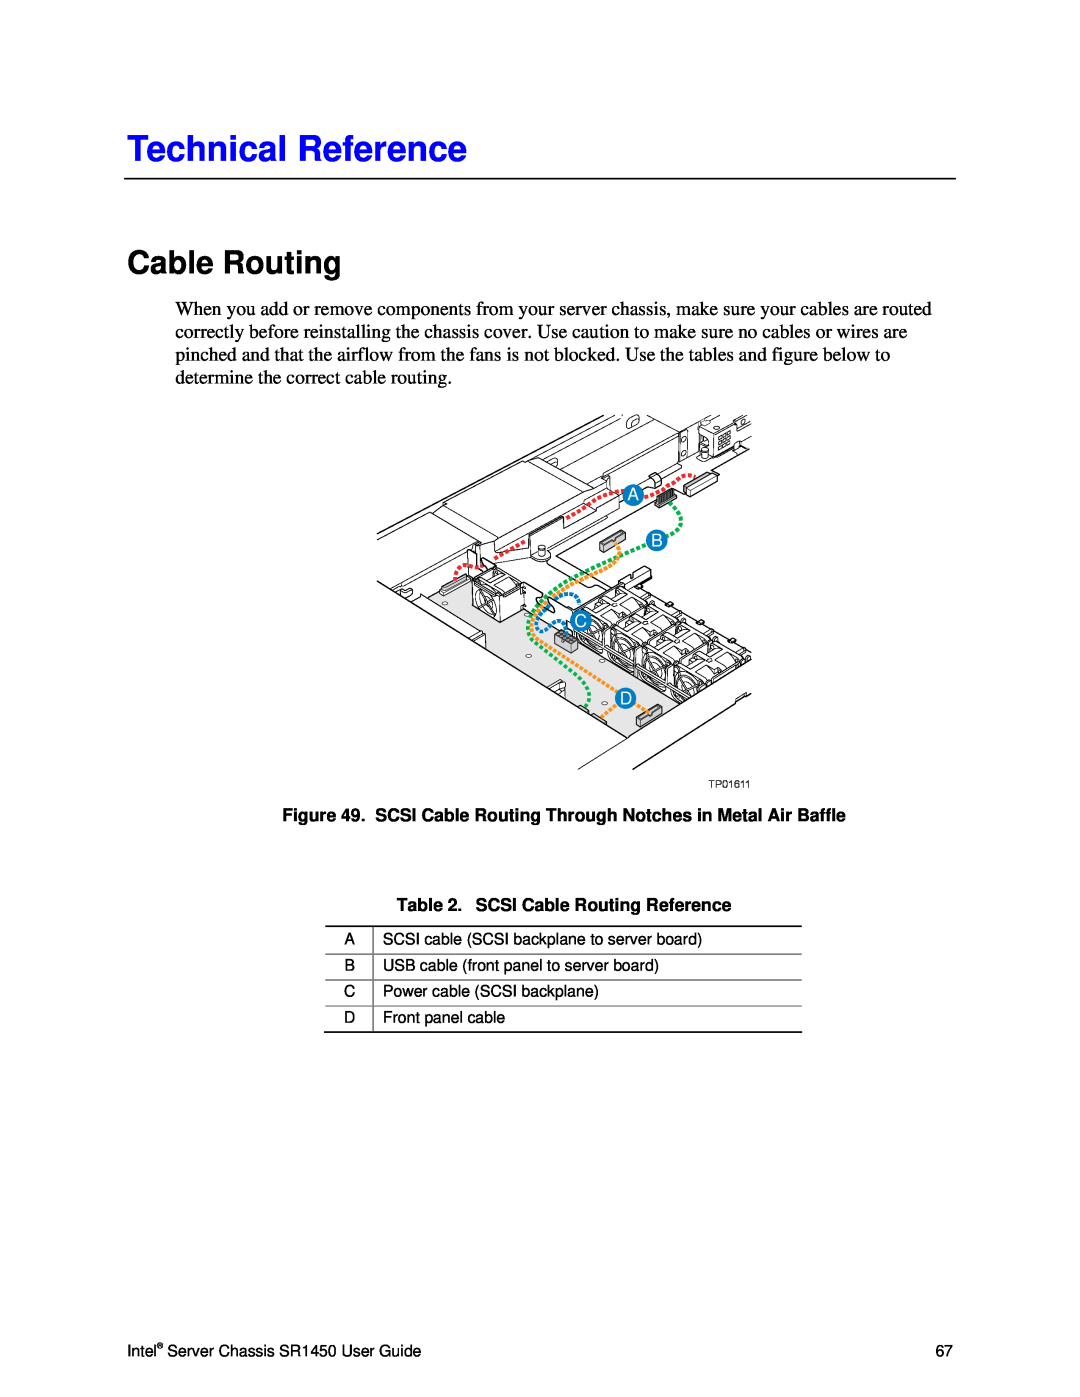 Intel SR1450 manual Technical Reference, Cable Routing 